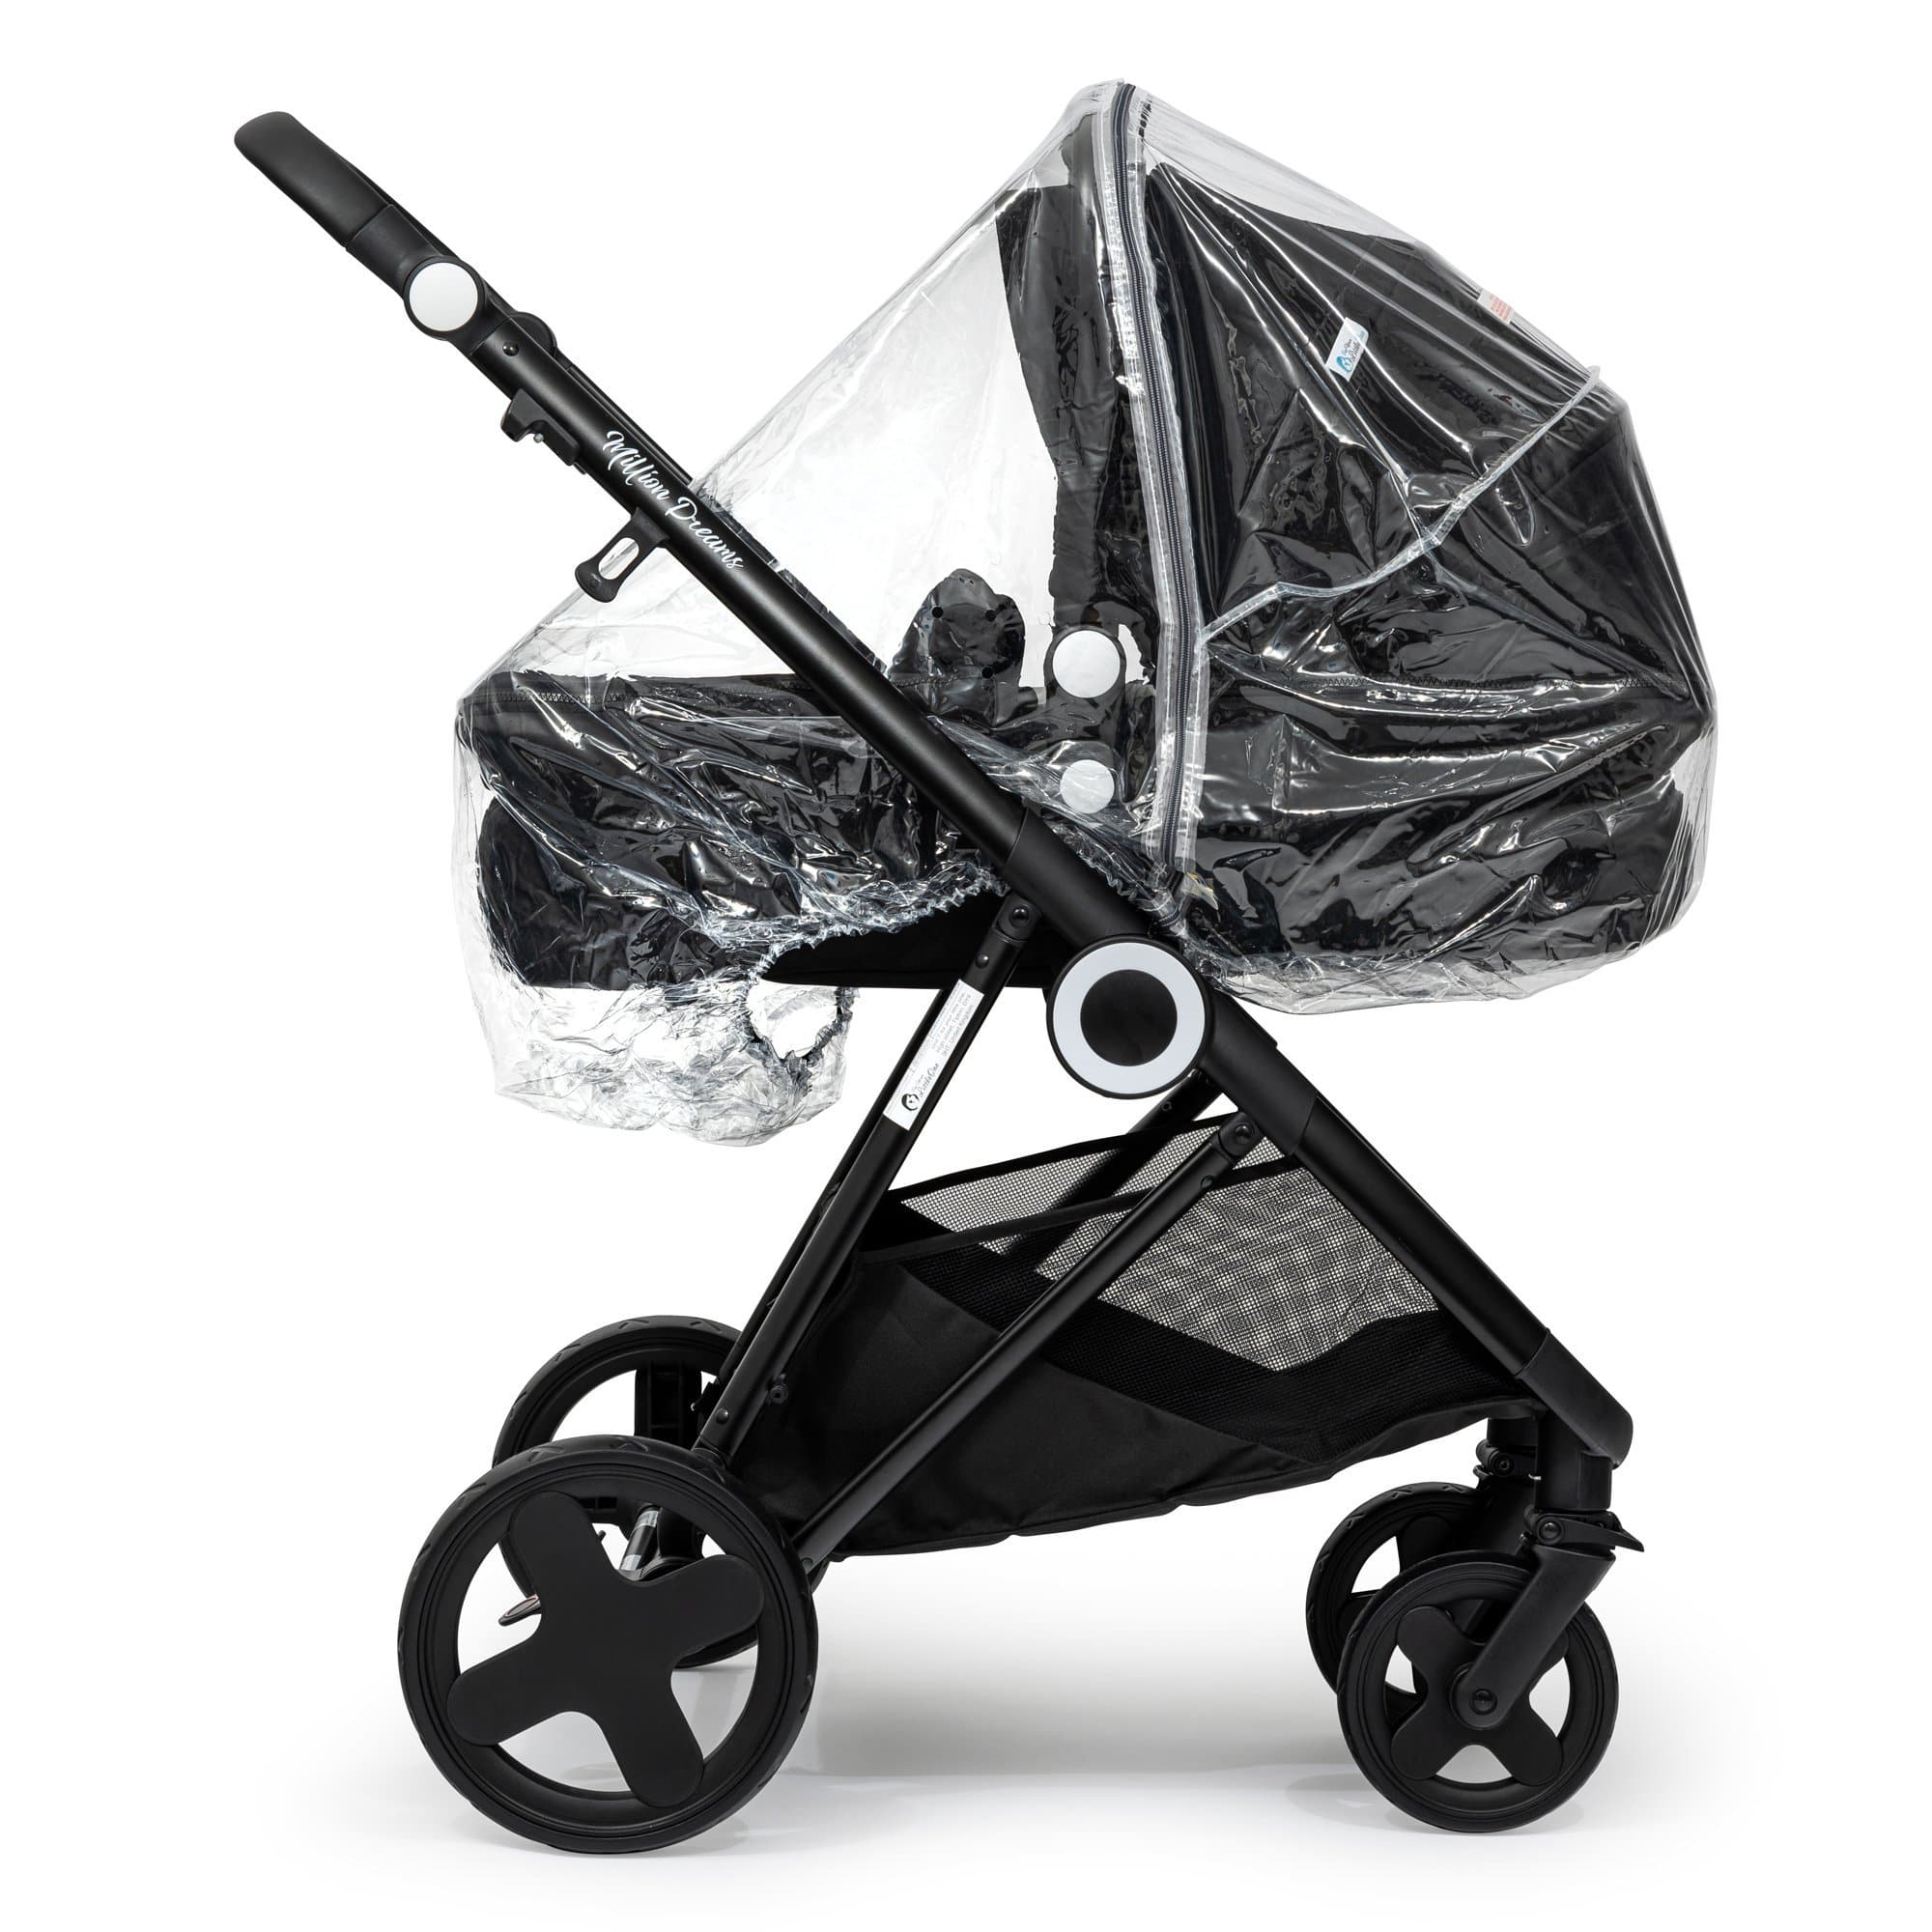 2 in 1 Rain Cover Compatible with Mountain Buggy - Fits All Models -  | For Your Little One